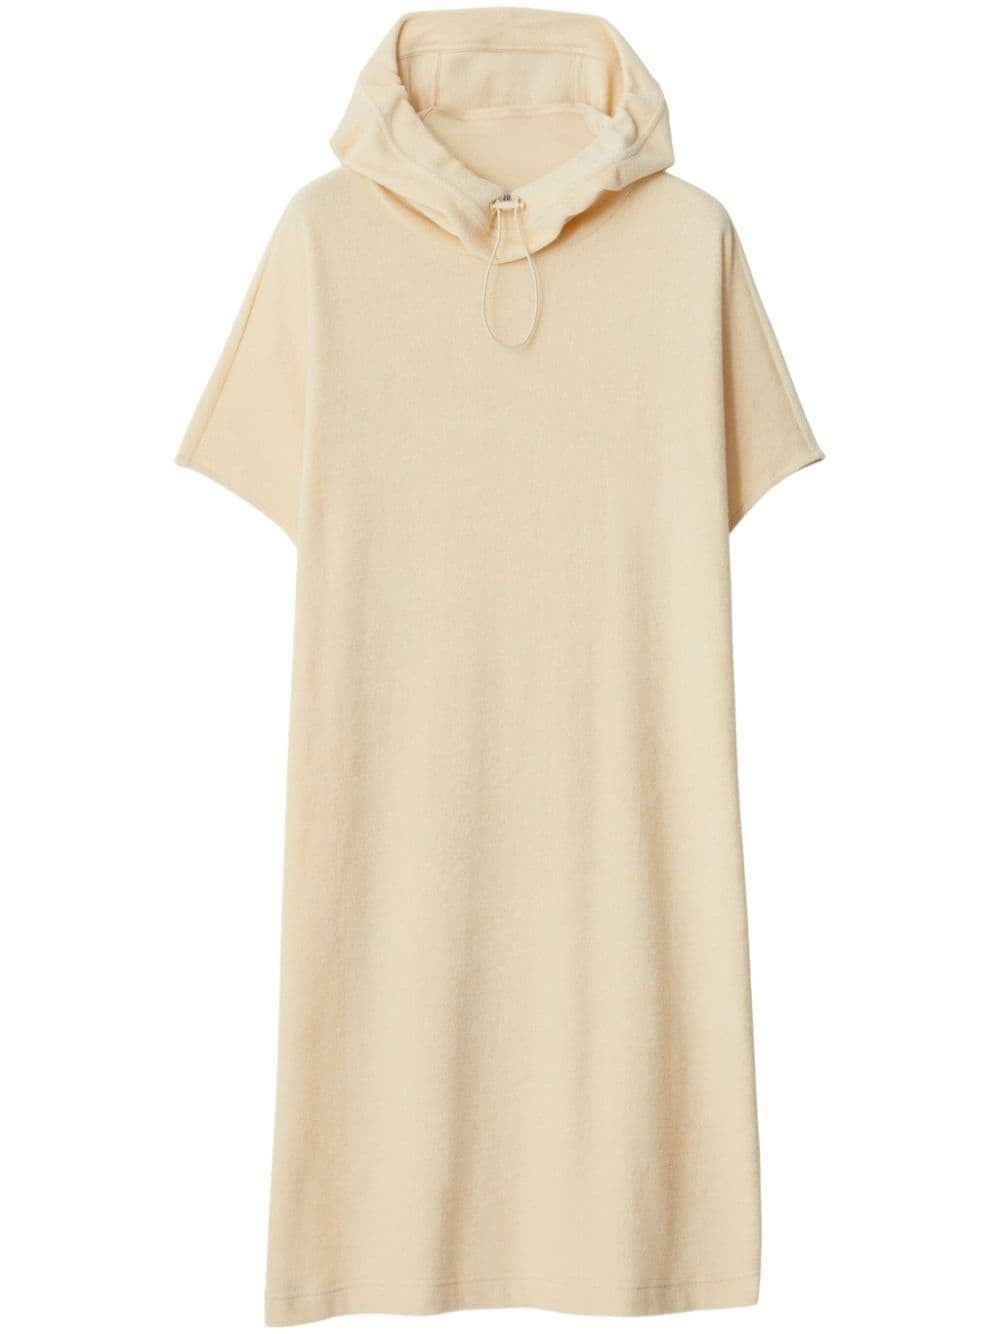 Towelling hooded cotton dress - 1